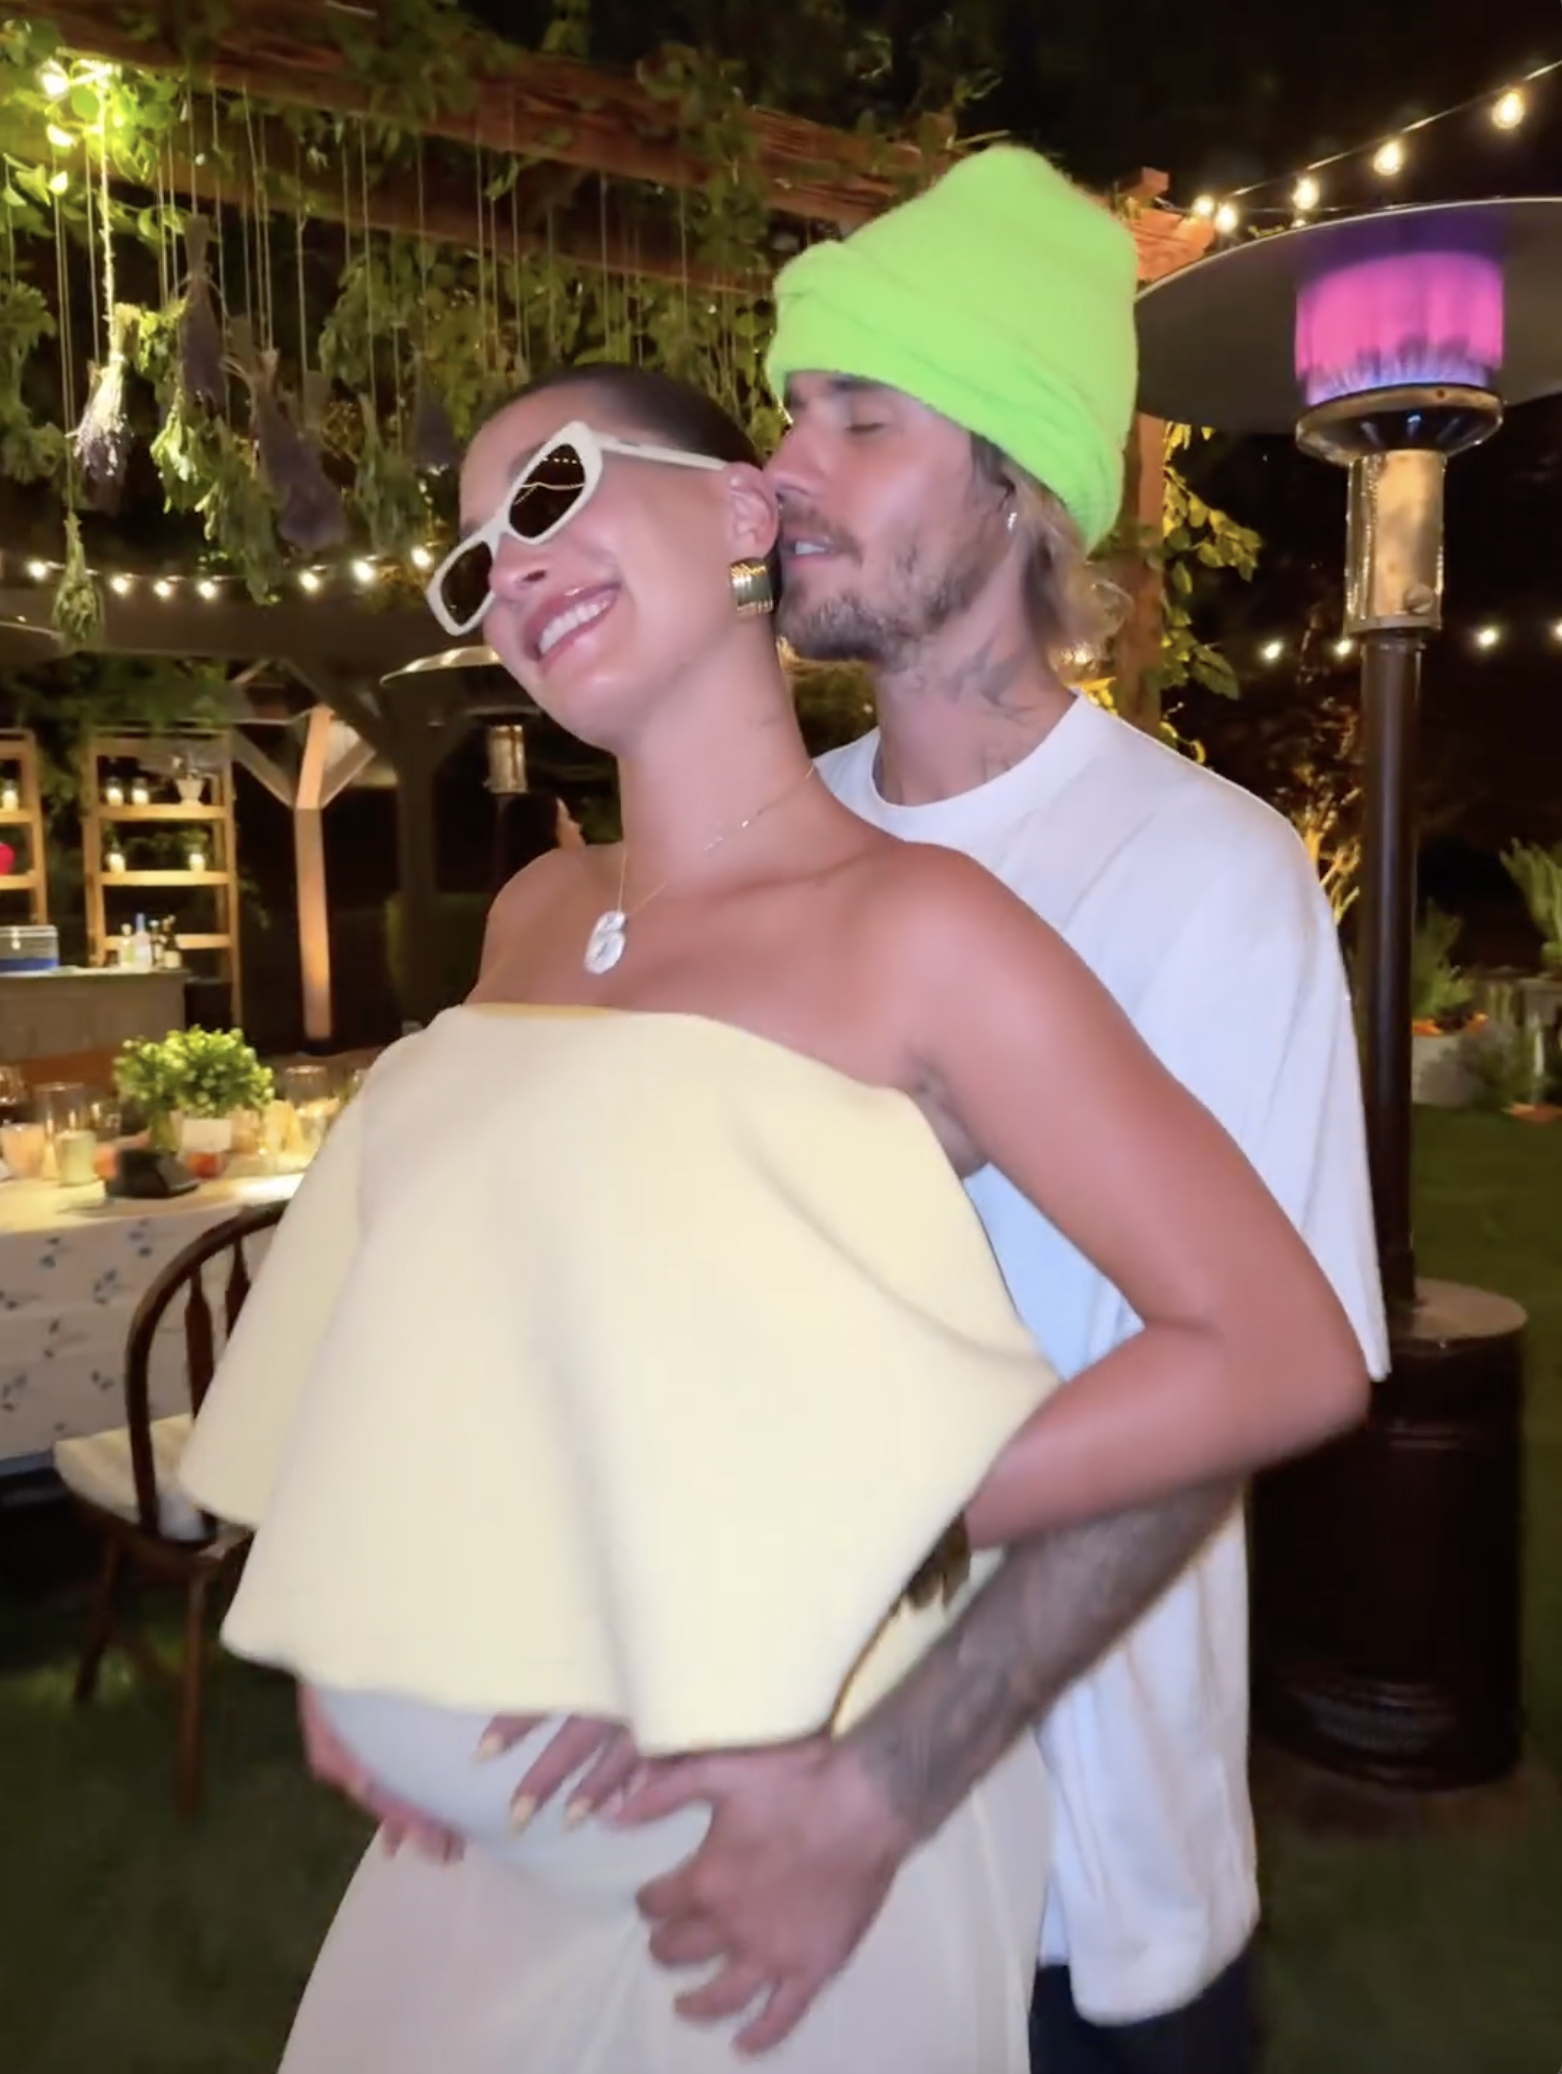 Hailey Bieber rubbed her baby bump as Justin held her in a video taken at the baby shower